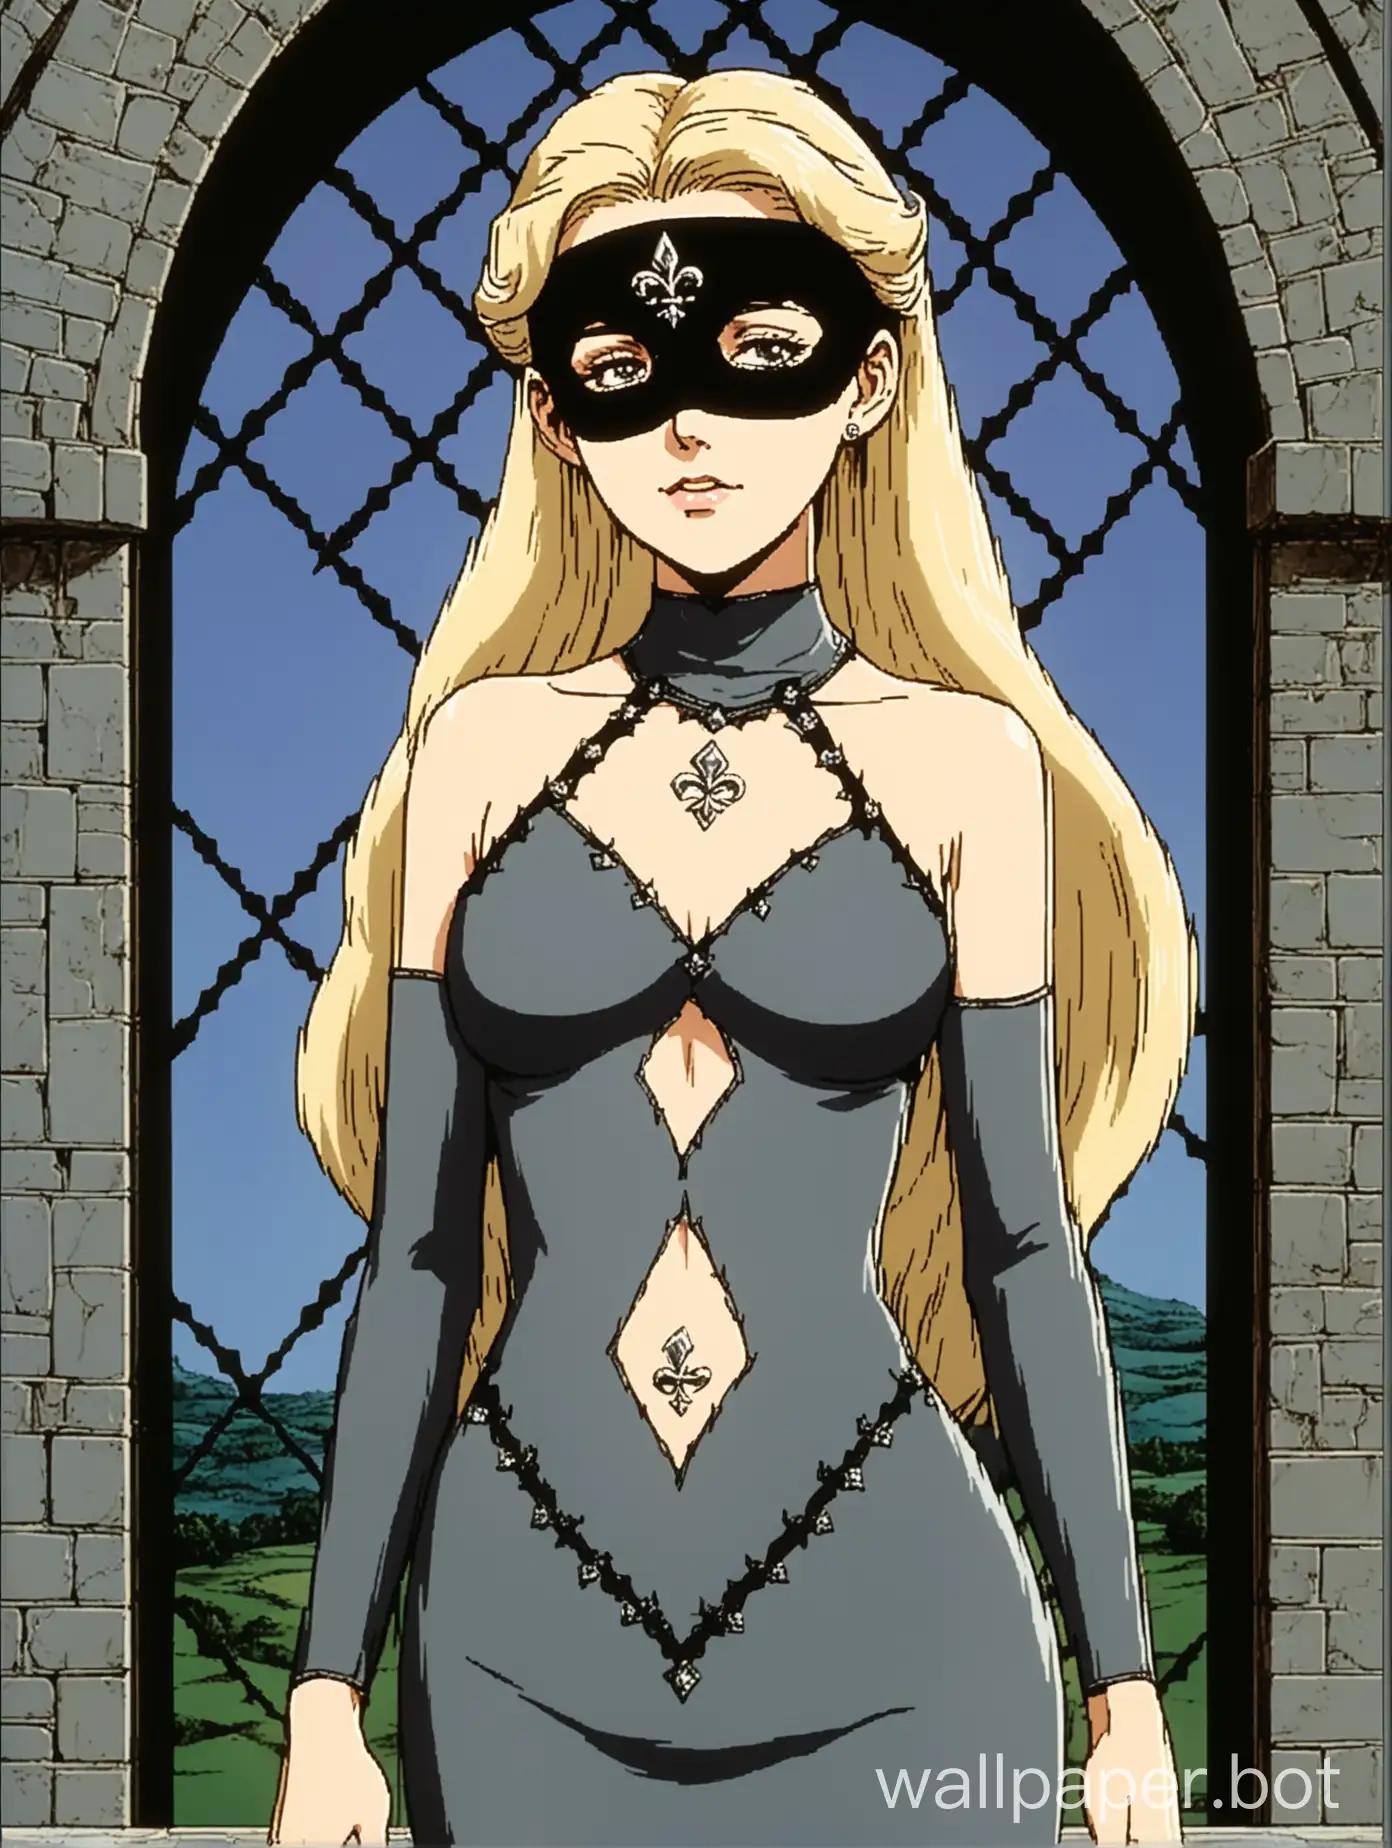 a young and attractive white woman, she has long wavy white-blonde hair, standing regally, elegant and slender, thin sharp face, wearing a black blindfold, wearing a sheer thin dark grey skintight dress with a diamond stomach window cutout, fleur-de-lys navel piercing, decorative stitching, medieval elegance, 1980s retro anime